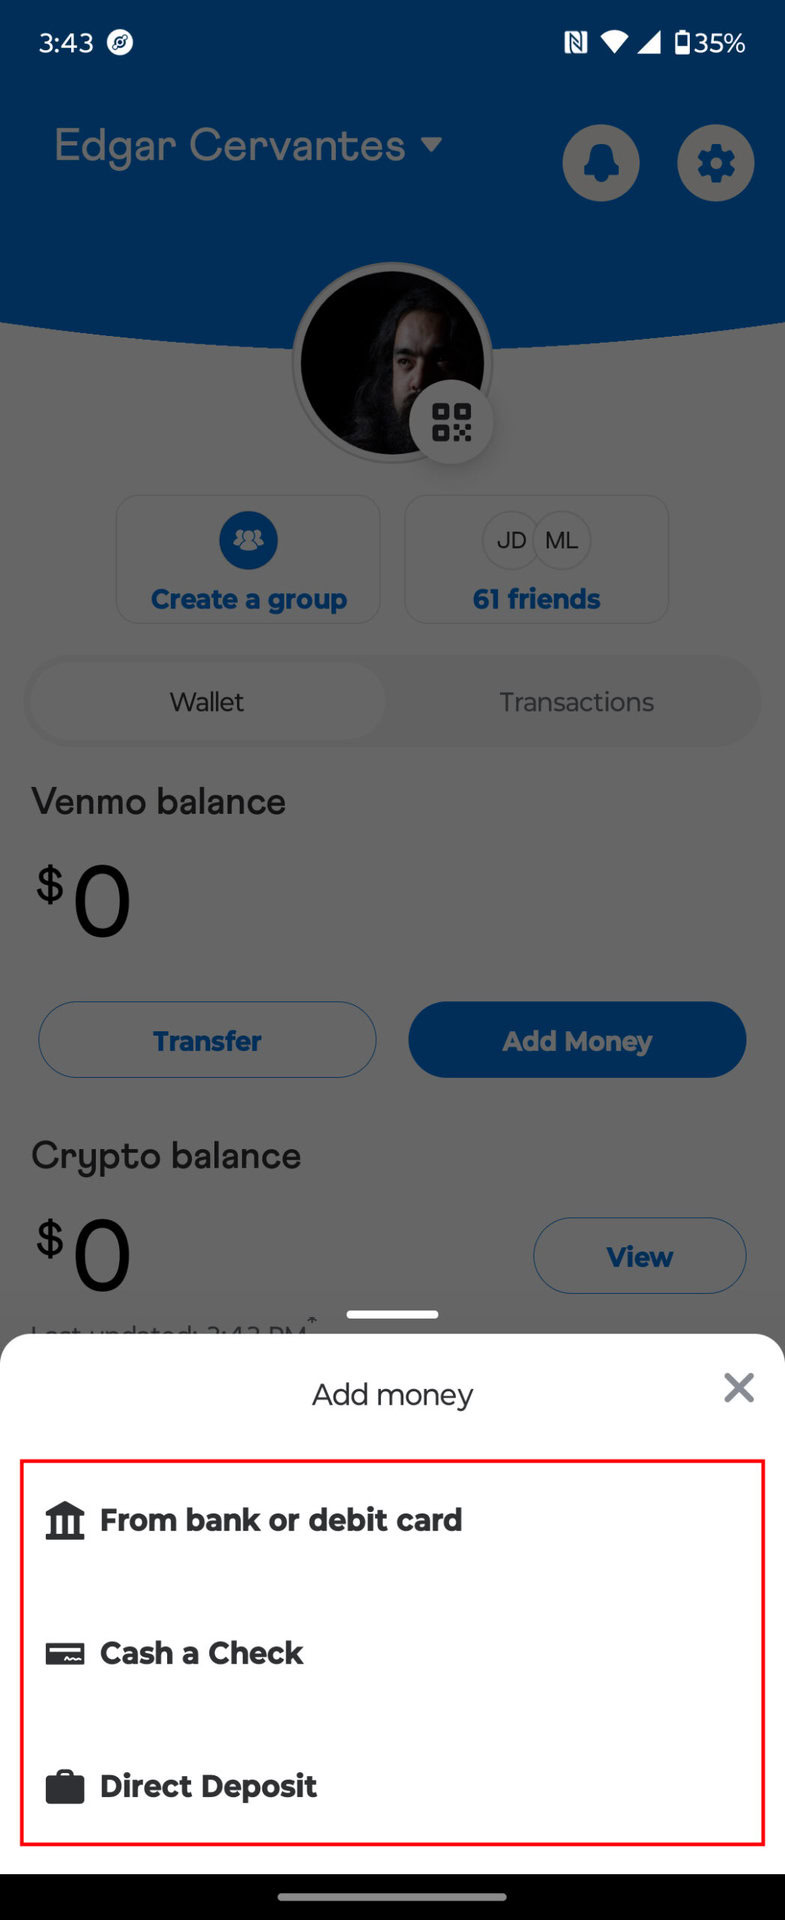 How to add funds to your Venmo balance (2)